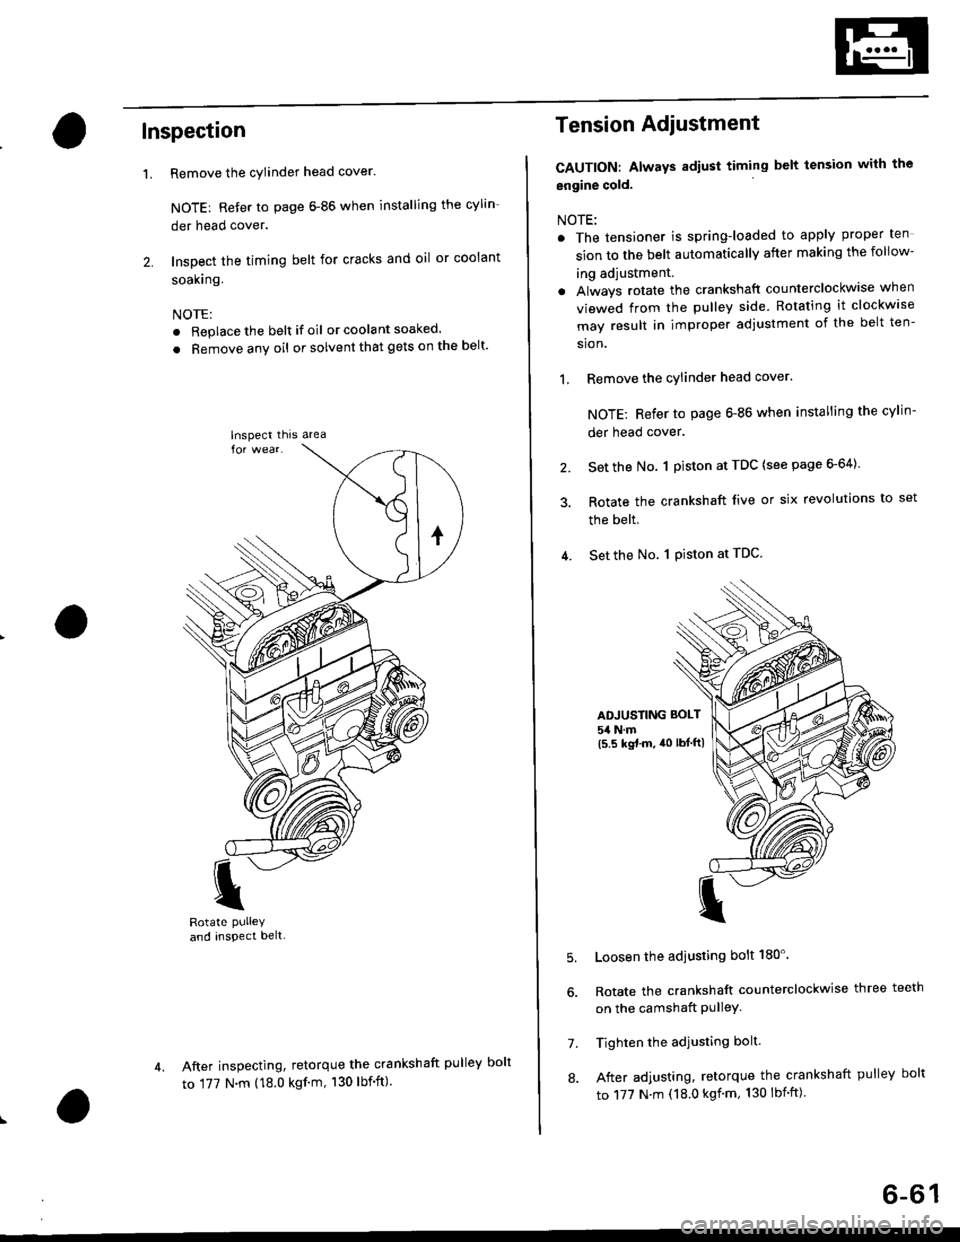 HONDA CIVIC 1996 6.G Workshop Manual Inspection
Remove the cylinder head cover.
NOTE: Refer to page 6-86 when installing the cylin-
der head cover.
Inspect the timing belt for cracks and oil or coolant
soakrng.
NOTE:
. Replace the belt i